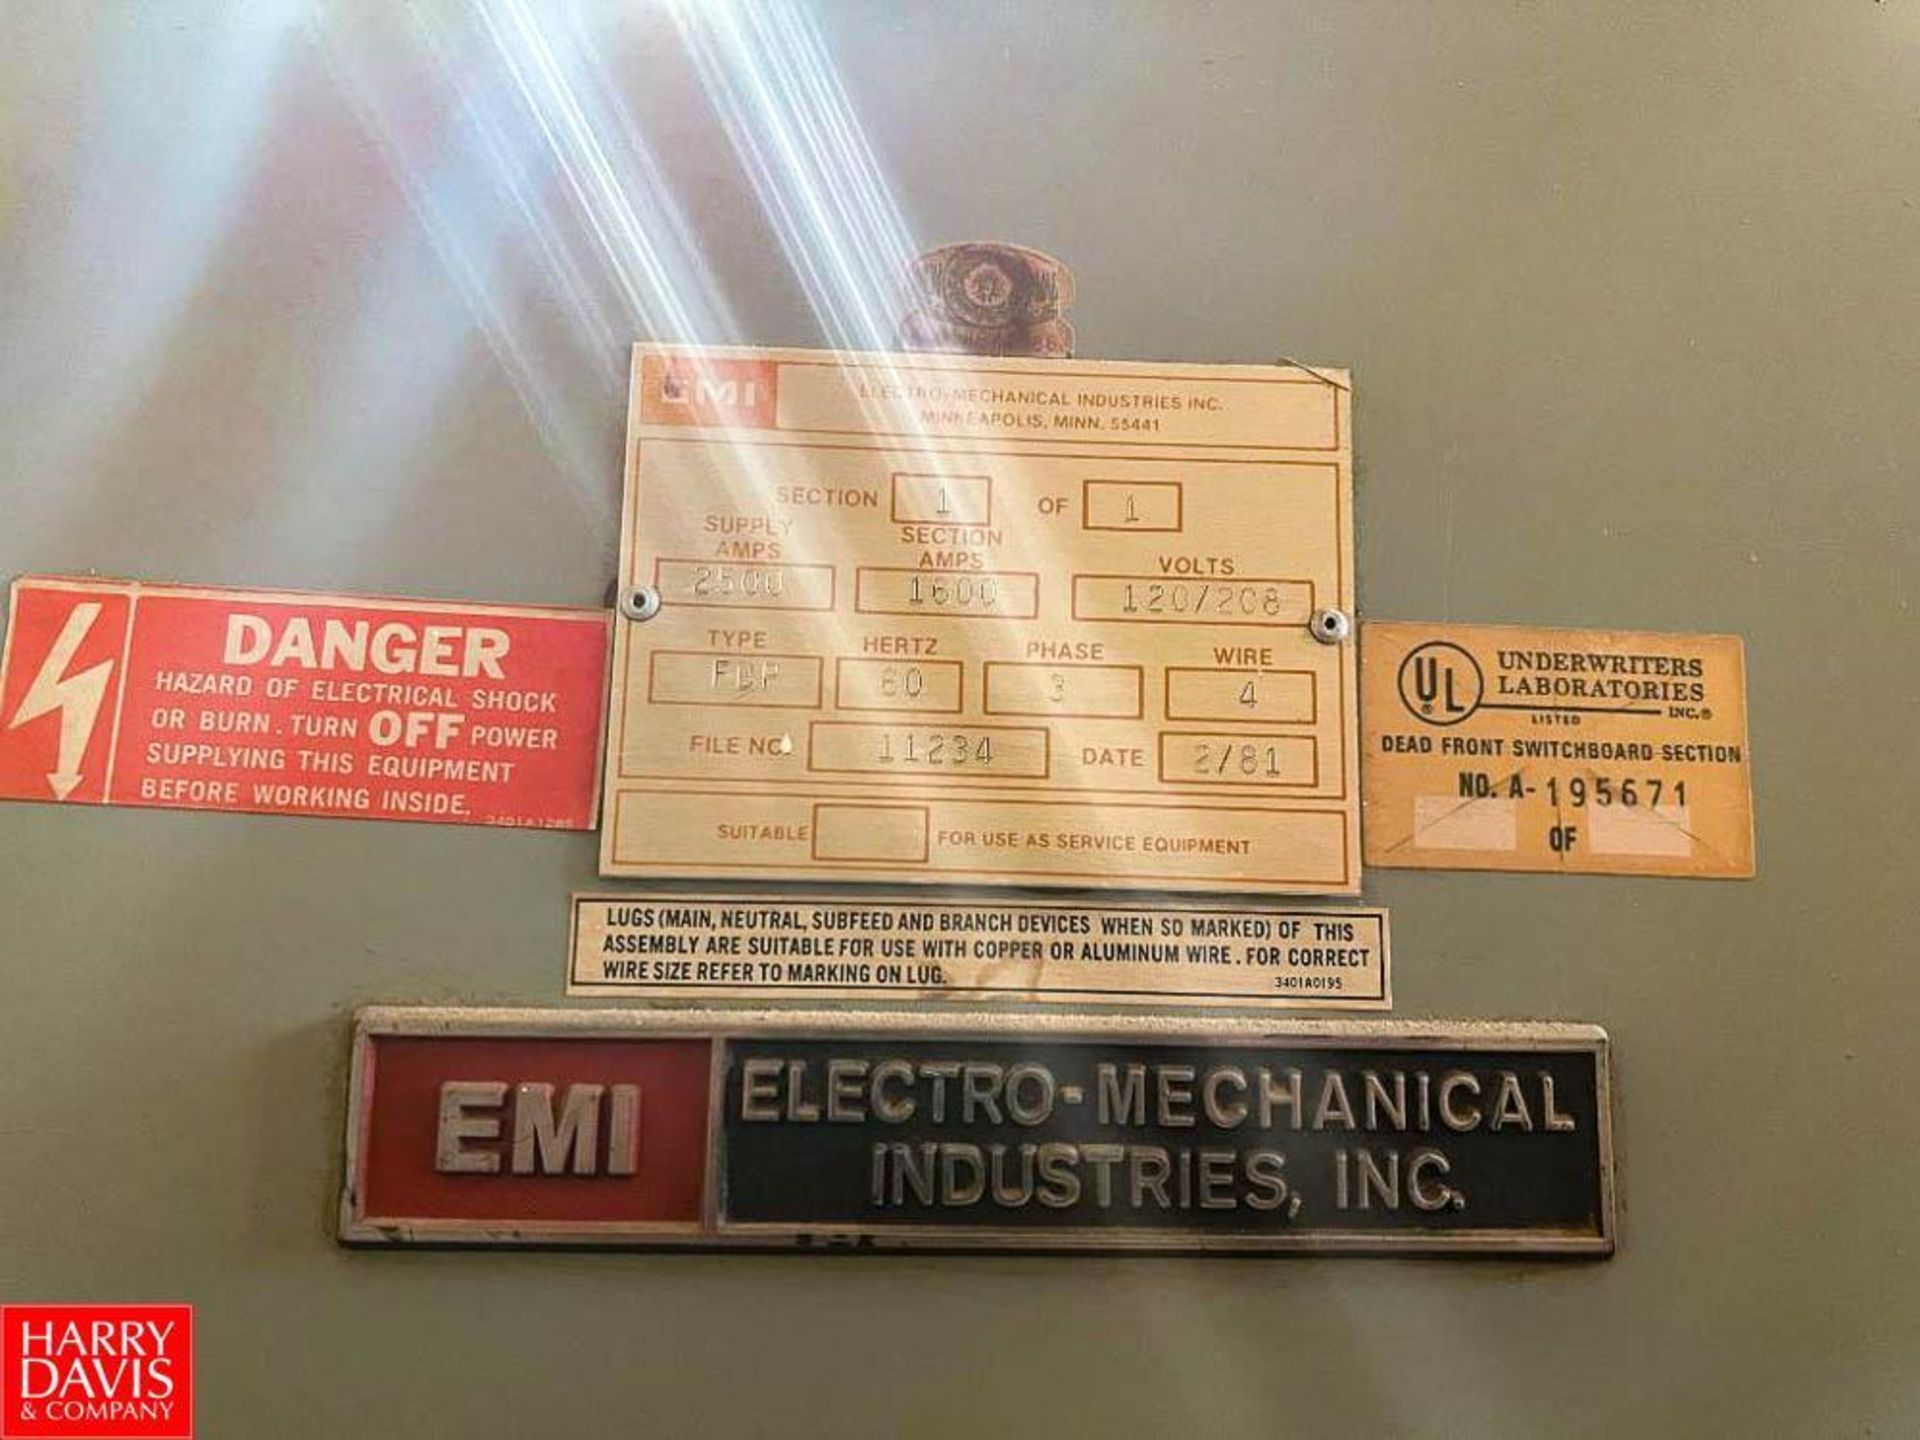 Electro-Mechanical Industries, Inc. Control Center with (18) Disconnects, 2500 Supply Amps - Image 2 of 2